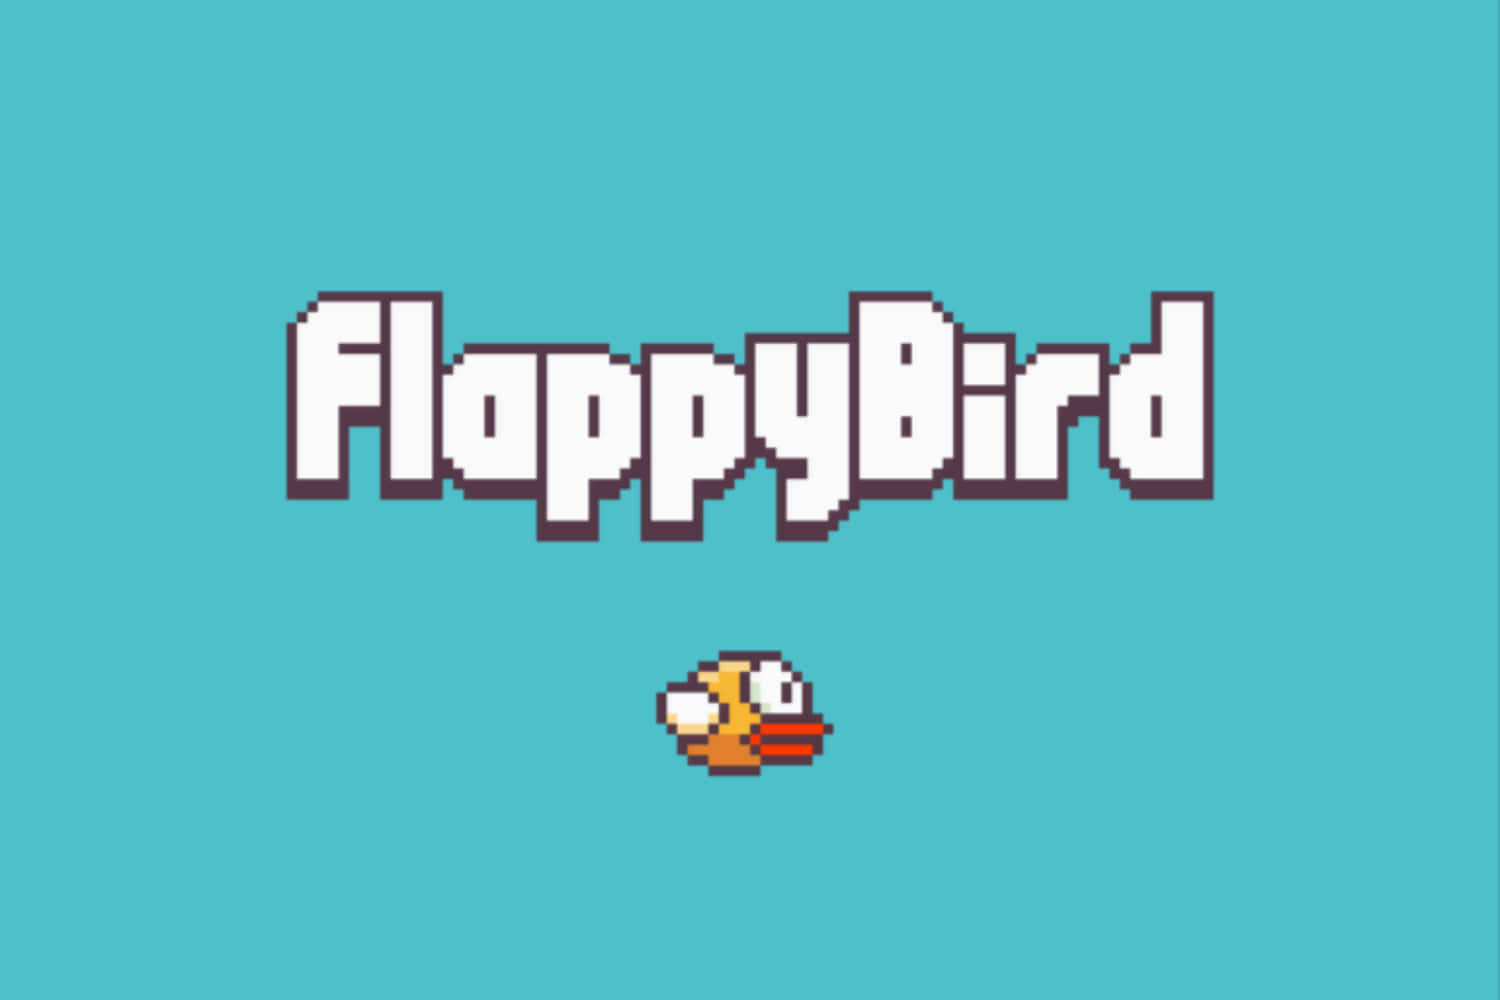 Get your flapping fingers ready and join the Flappy Bird craze!